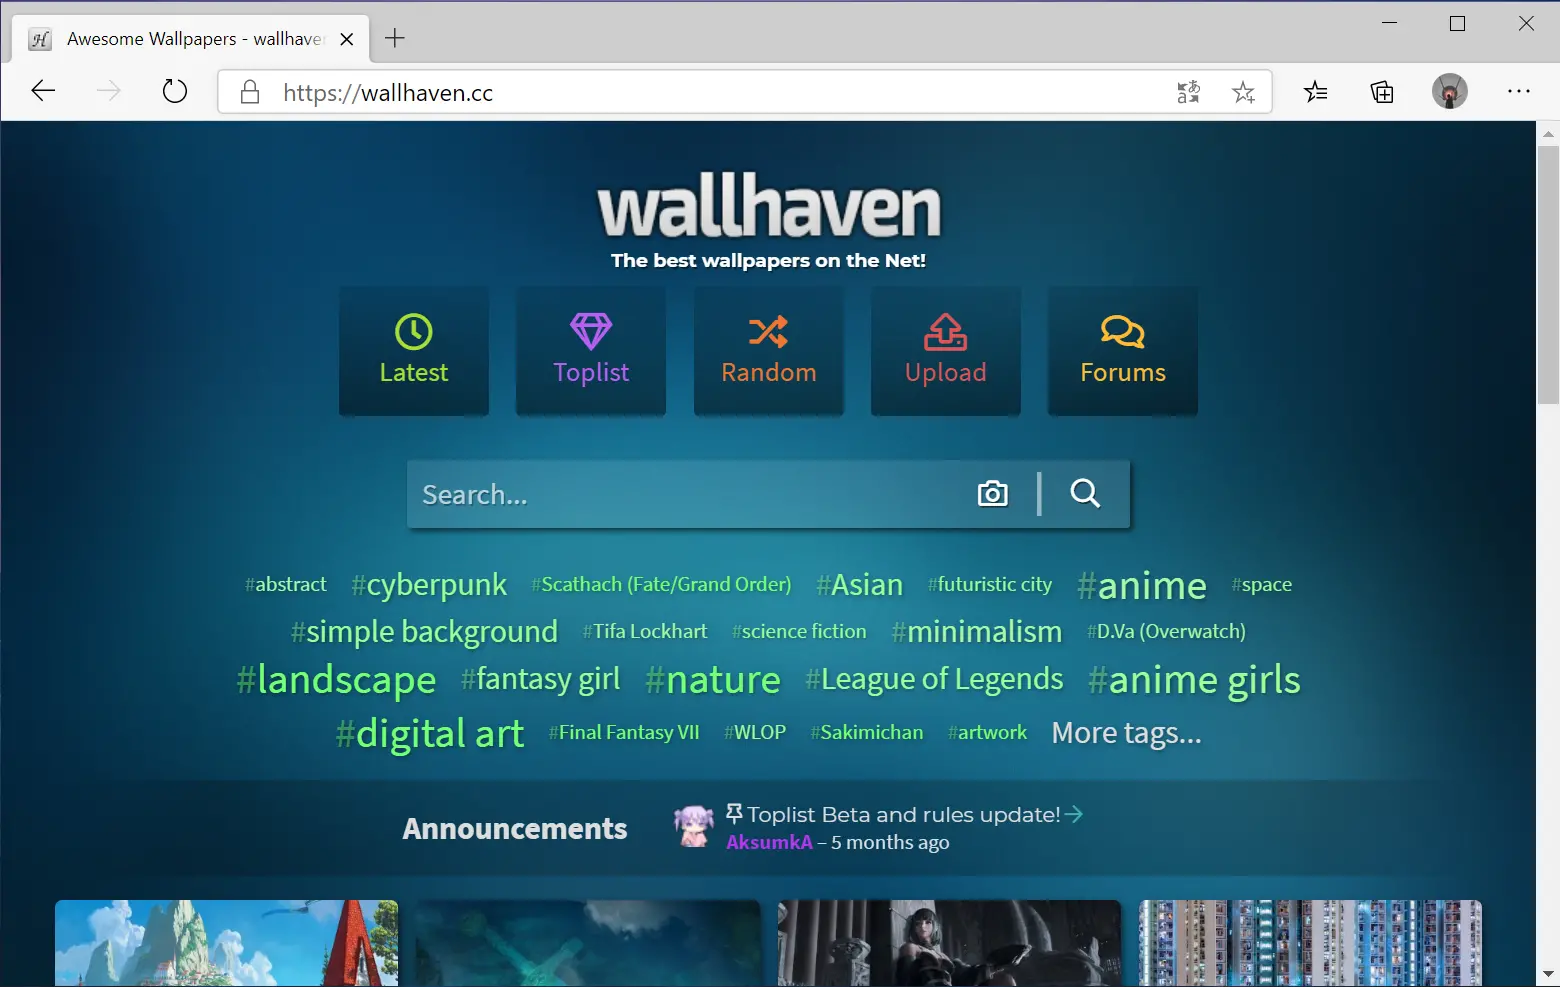 Wallhaven